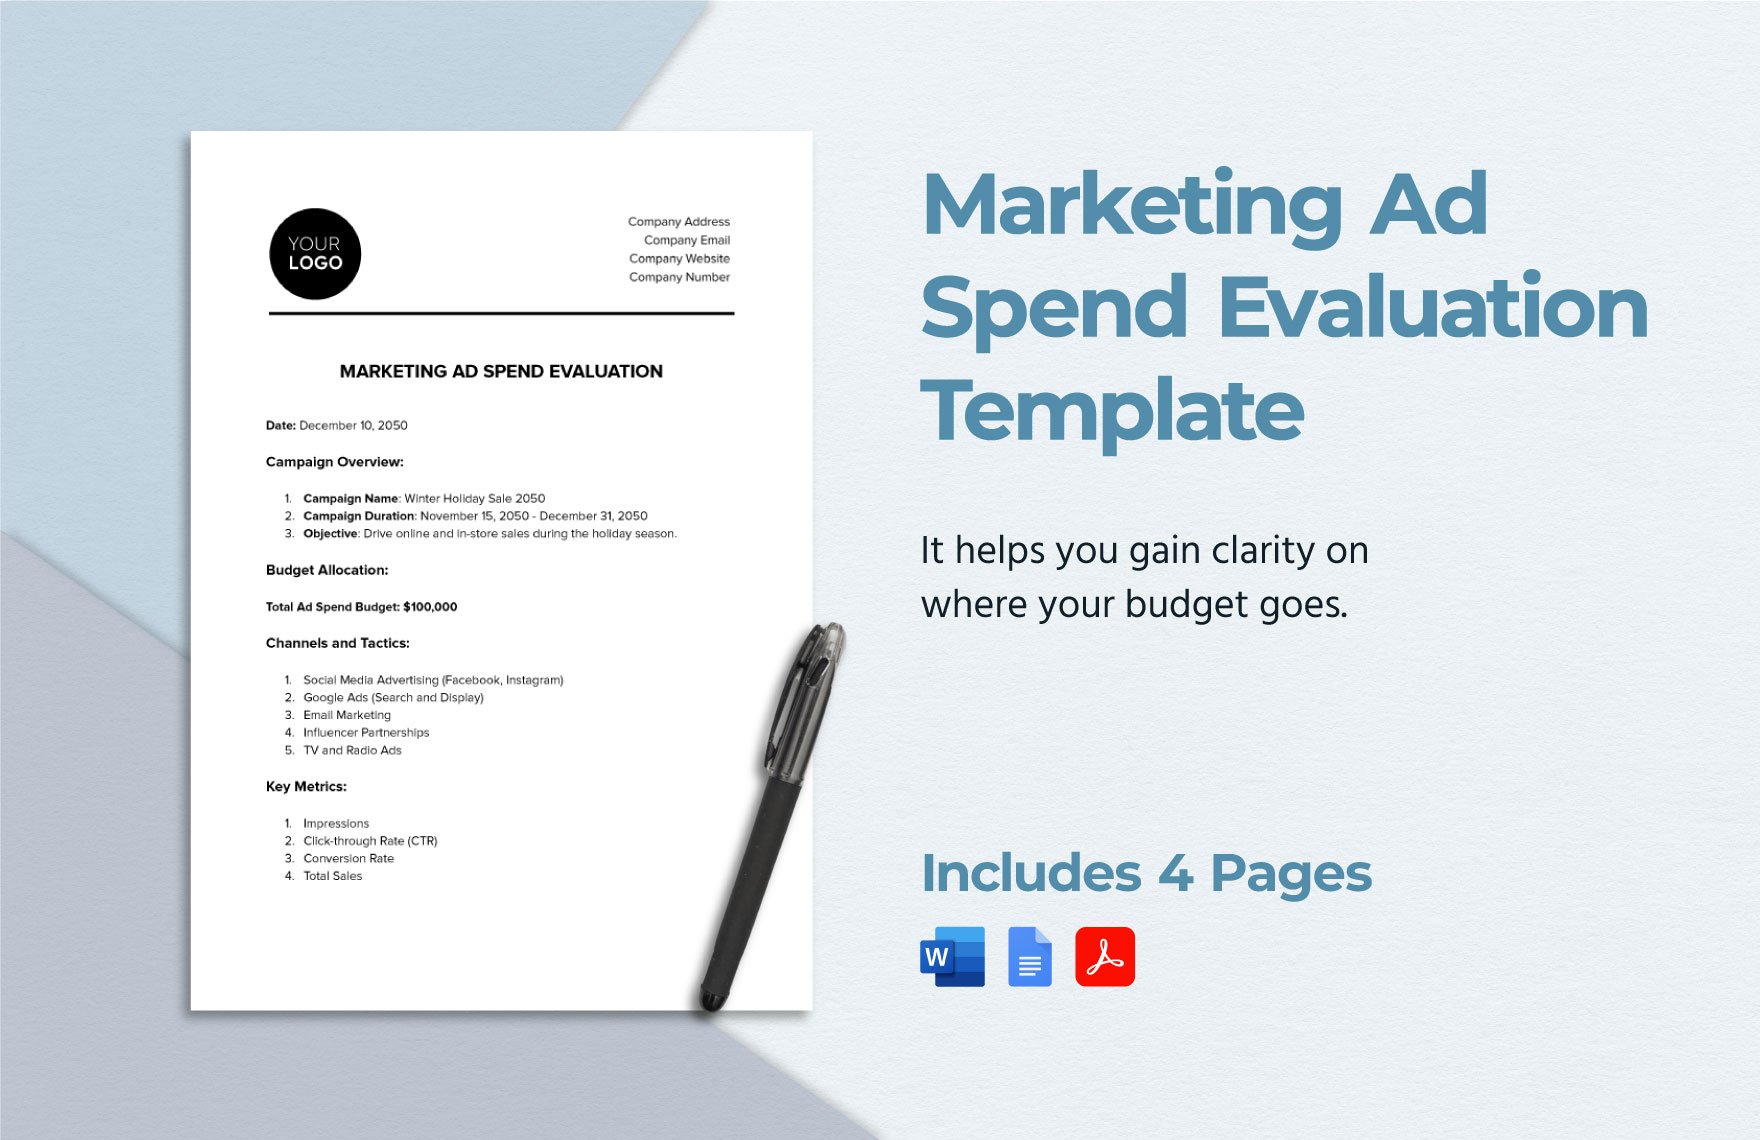 Marketing Ad Spend Evaluation Template in Word, Google Docs, PDF